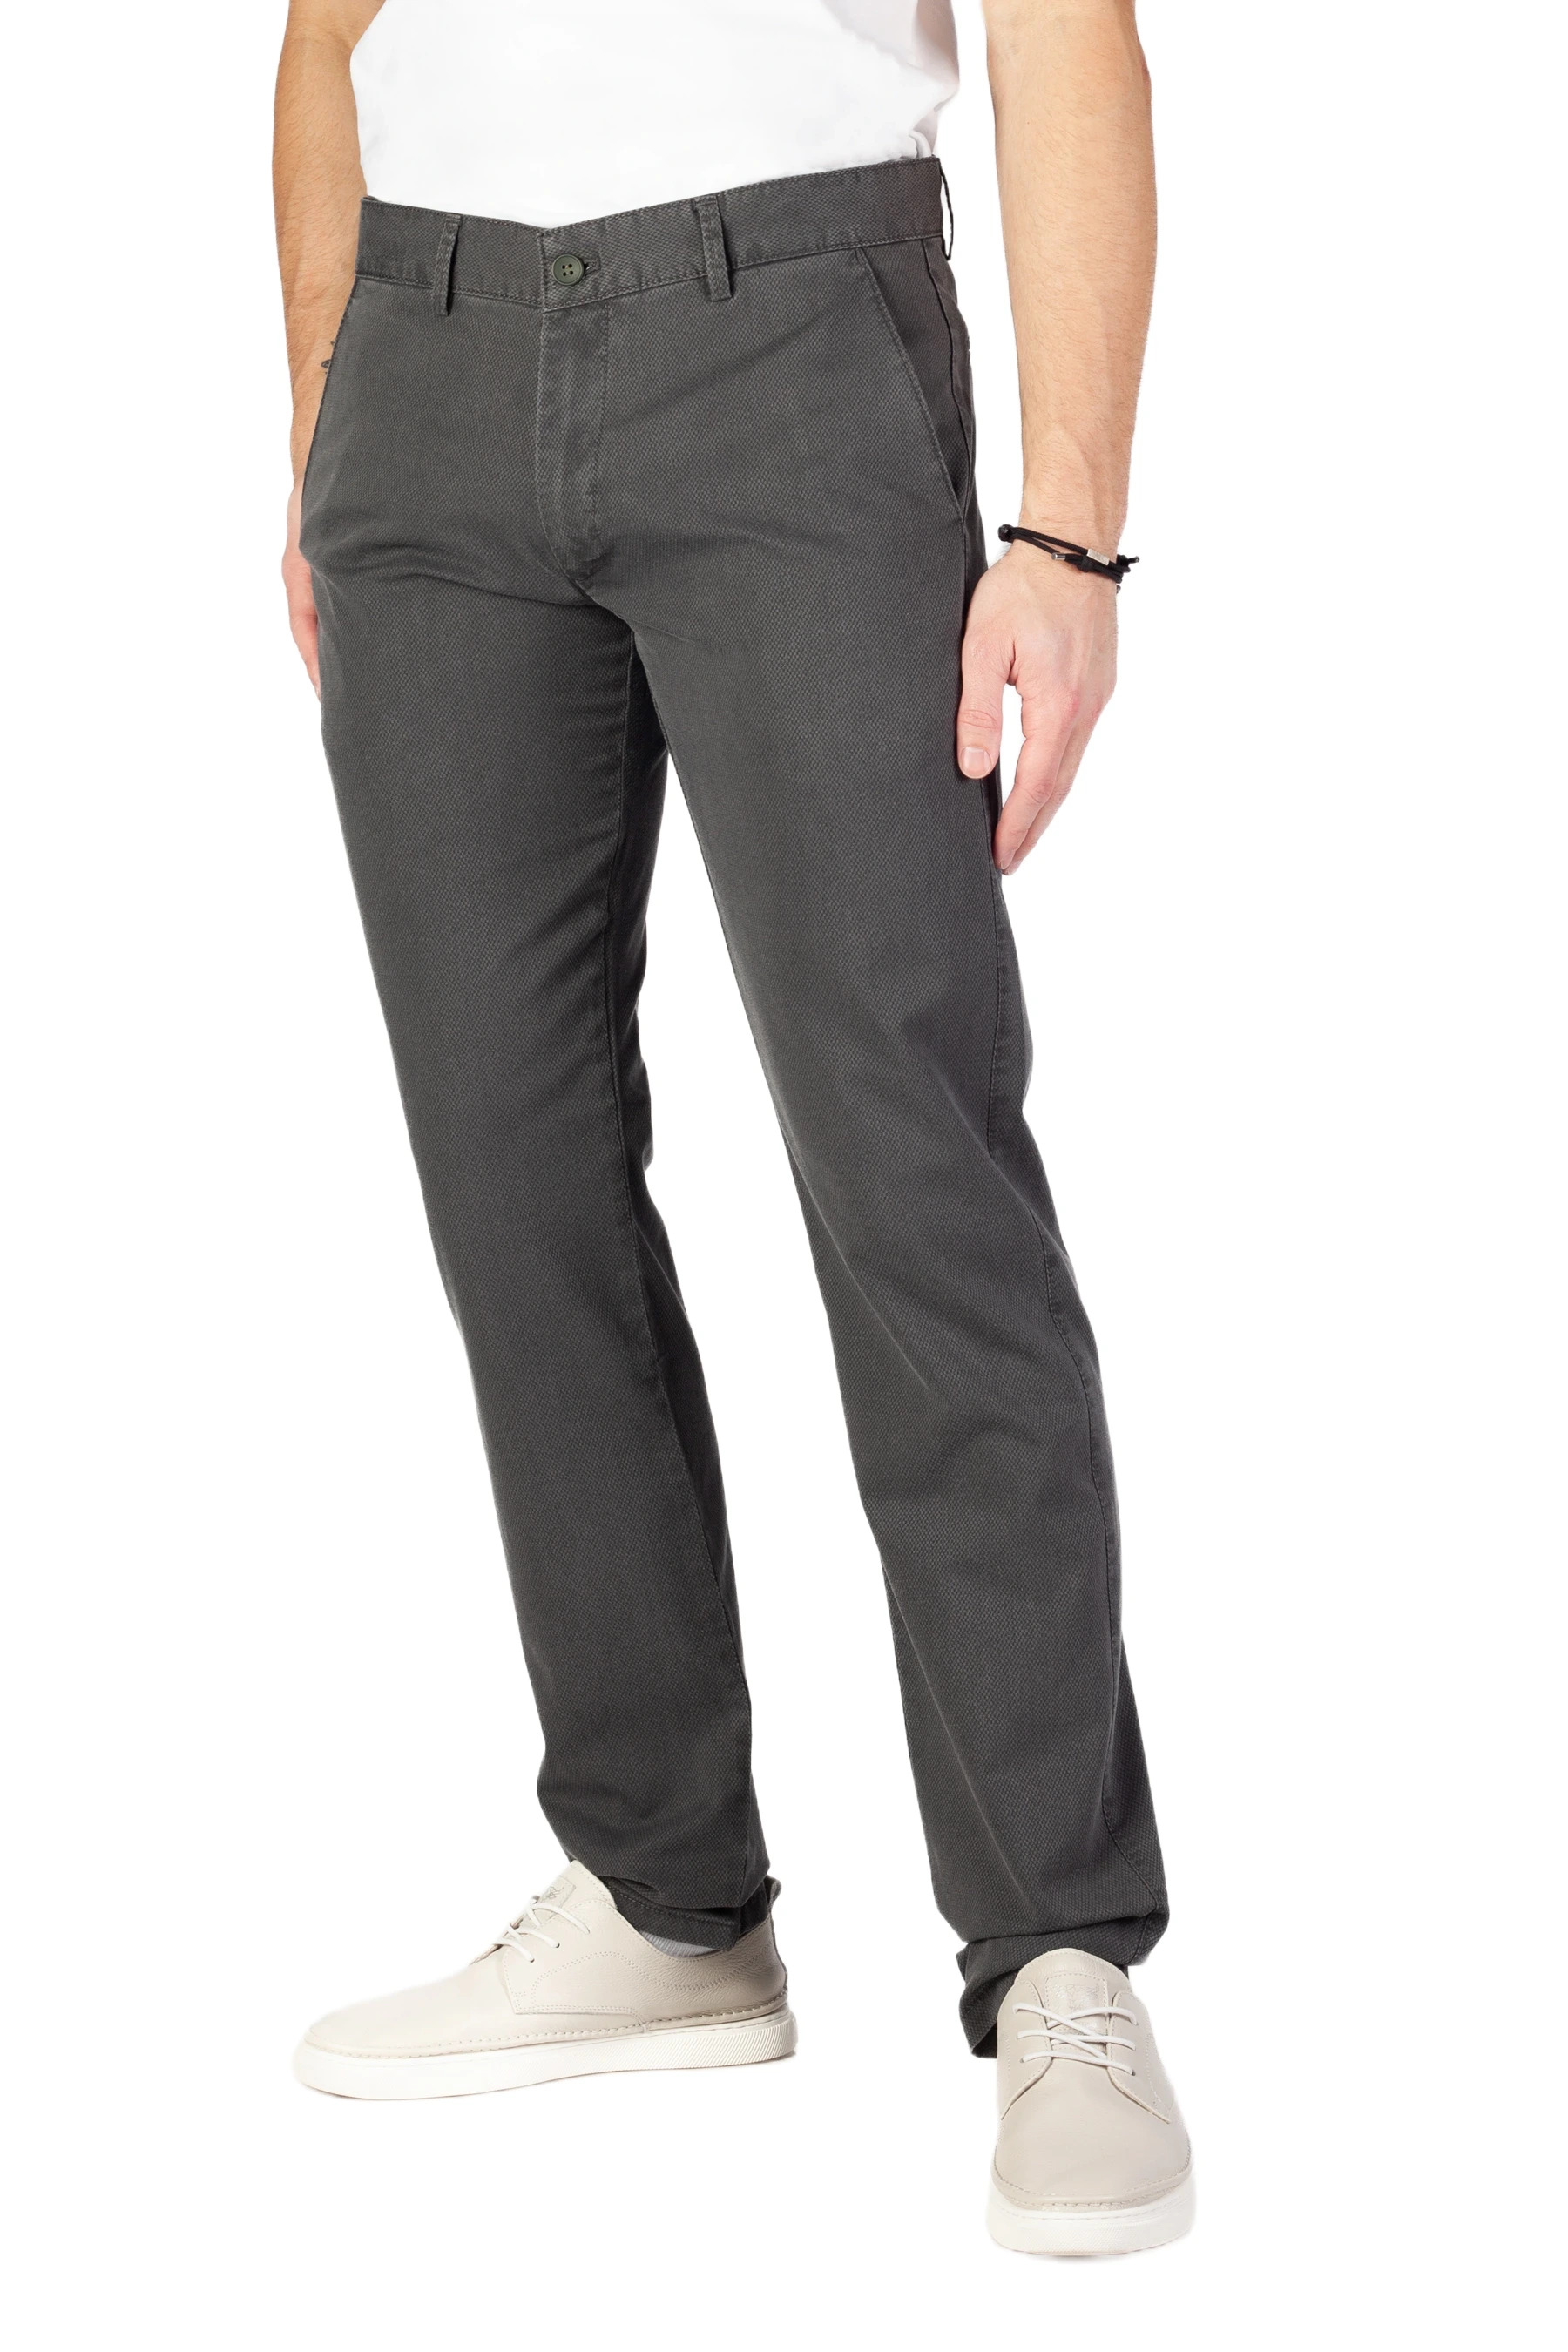 Chino pants BLK JEANS 8375-5133-132-206